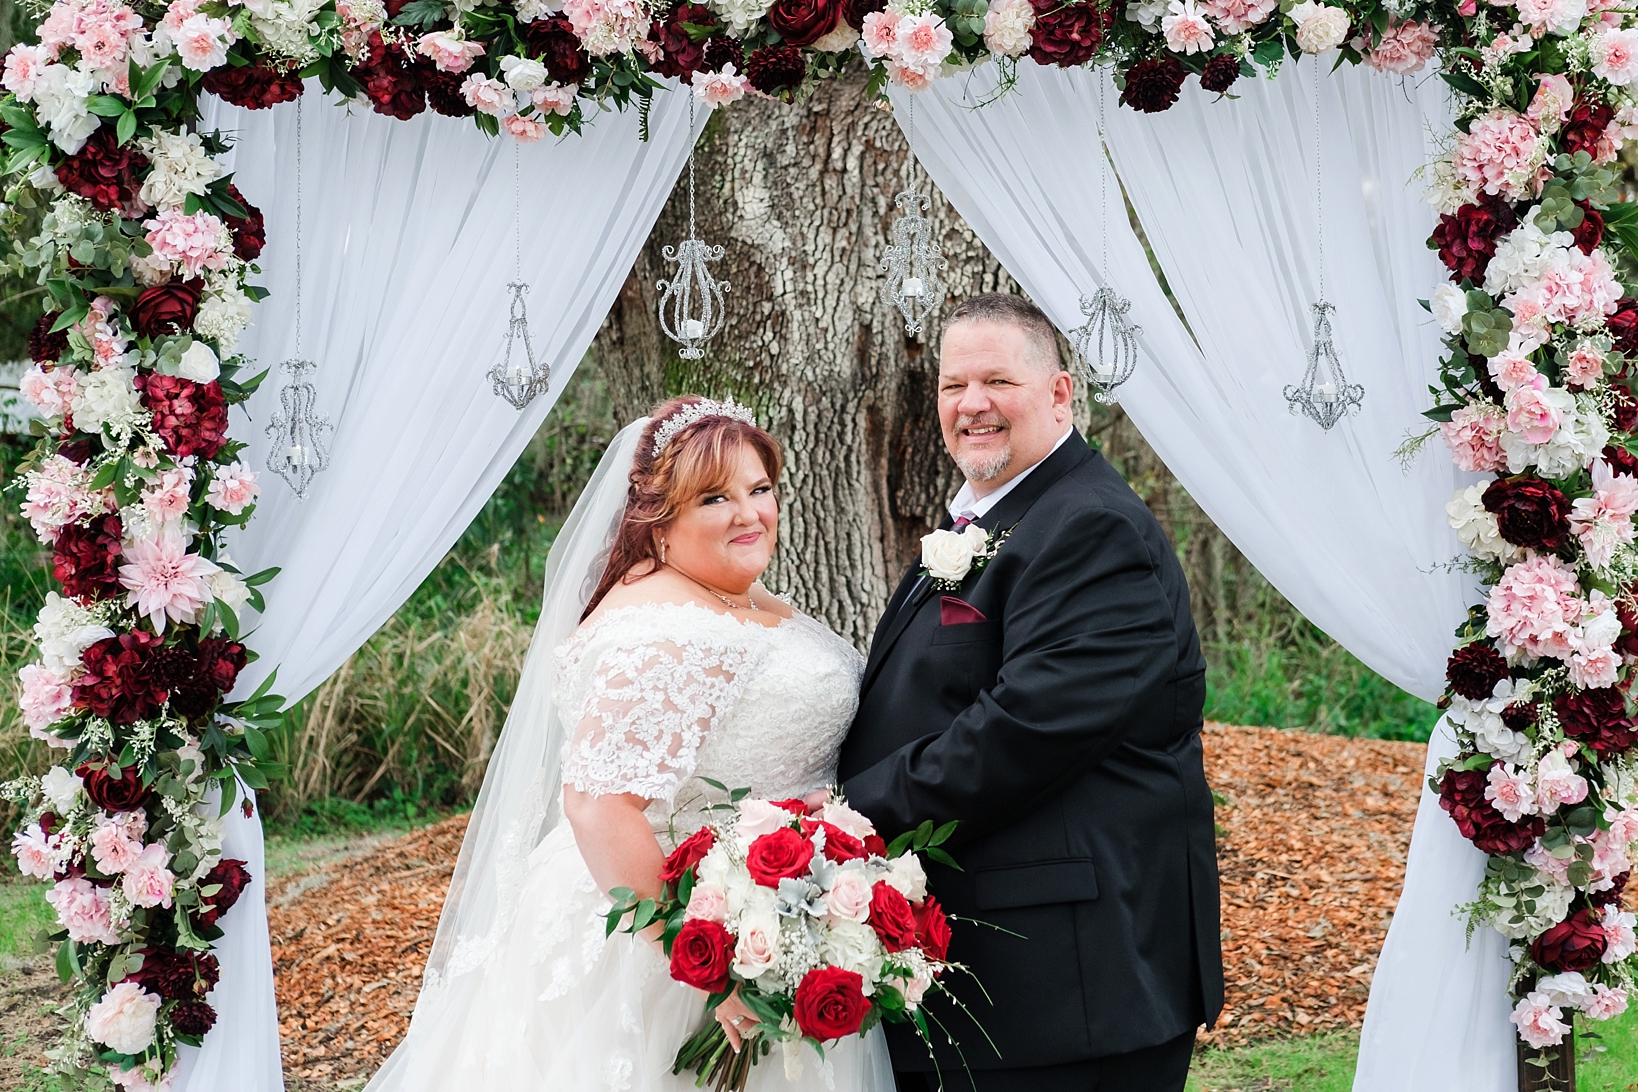 Bride and Groom pose for a formal photo under their floral arch at their cross creek wedding celebration